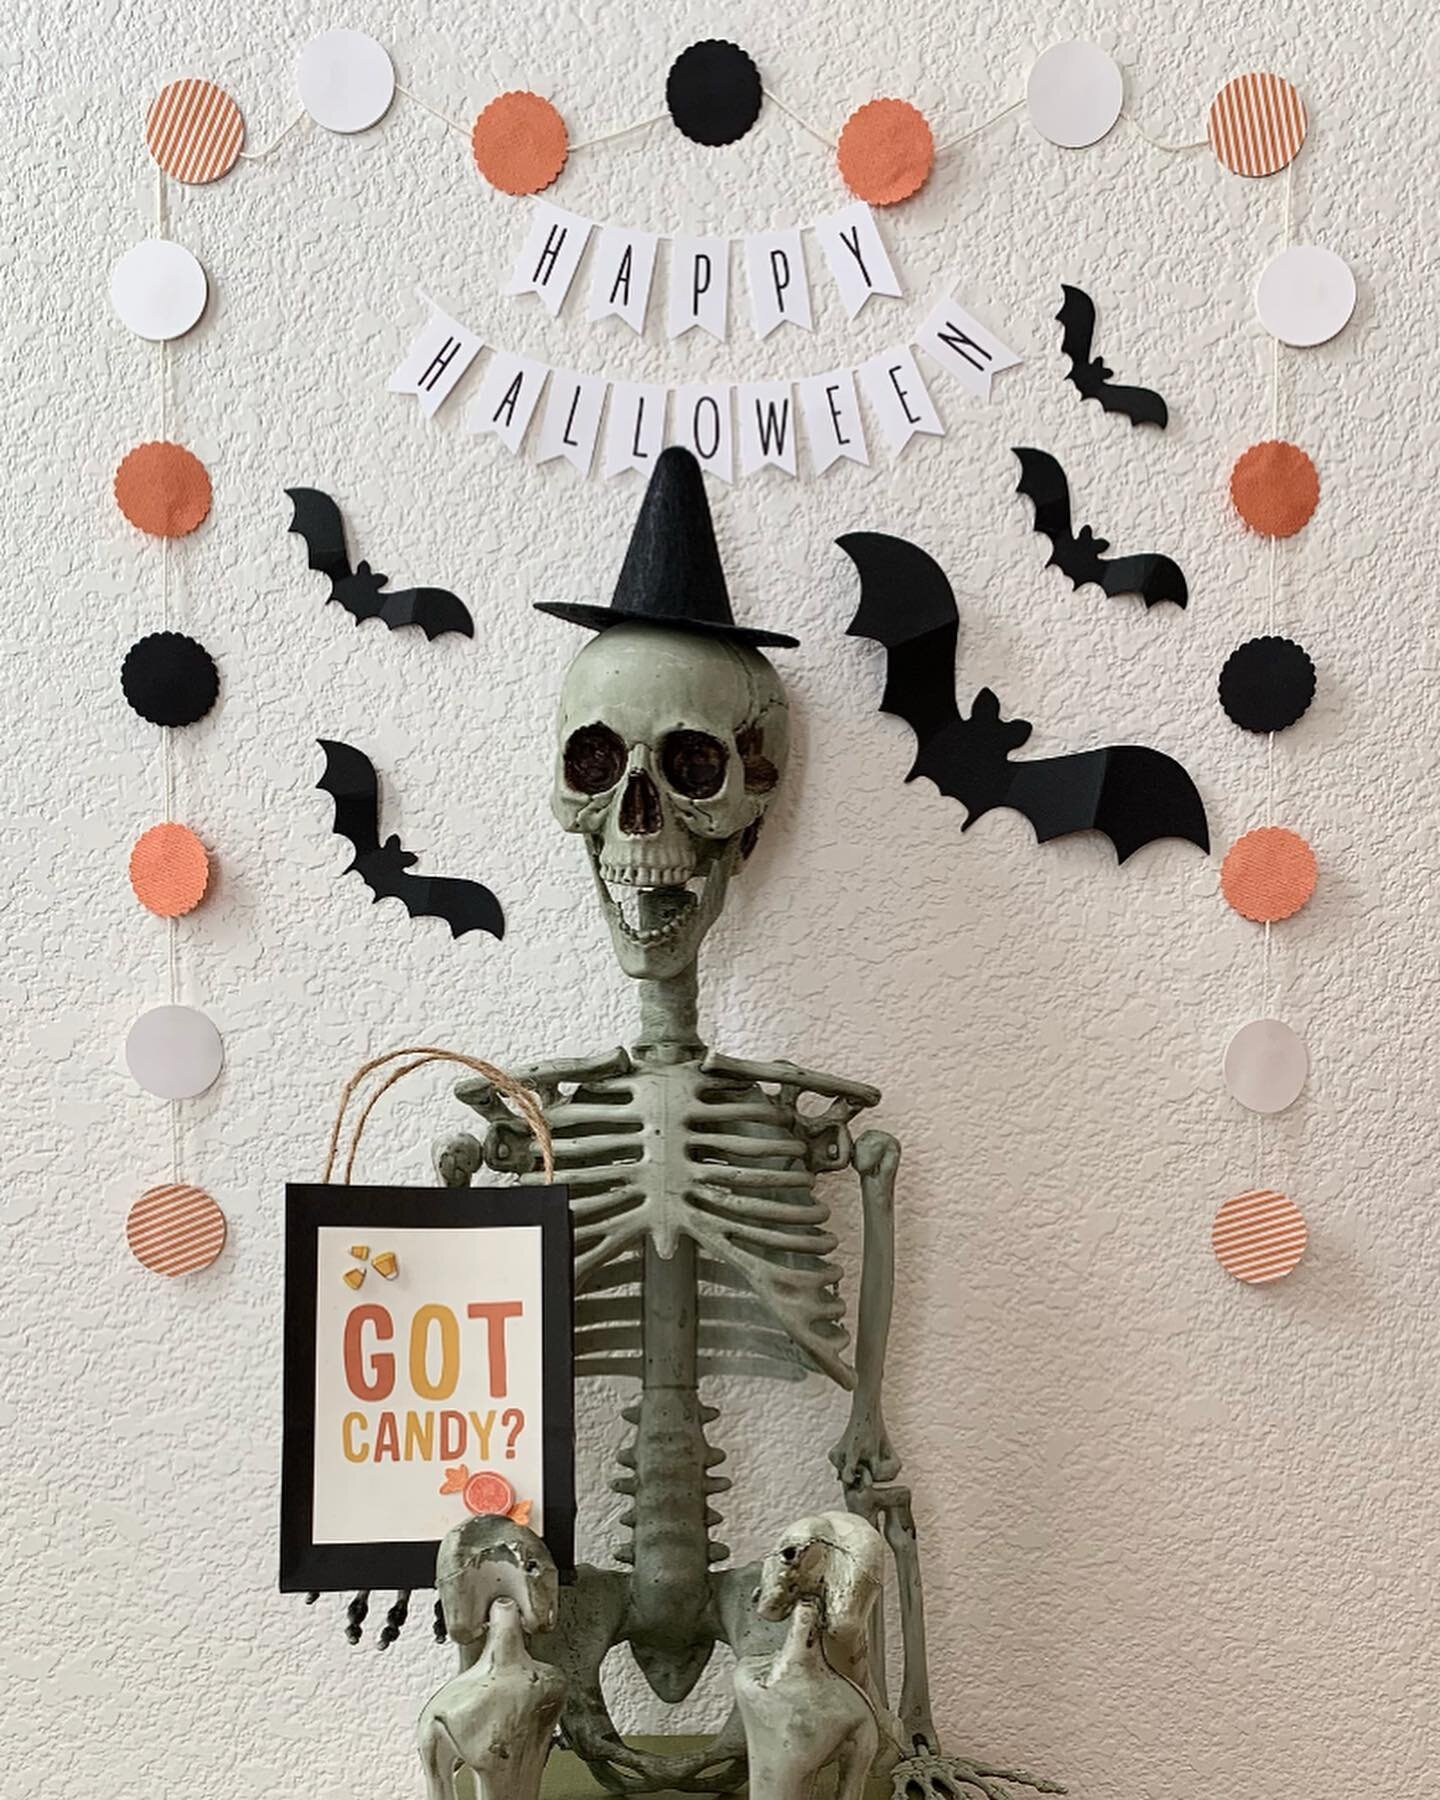 Got Candy?🍭🍬🍫

we&rsquo;re only asking for a friend.

&ldquo;Happy Halloween to all celebrating today!&rdquo;

-Maritza.

...........................................
#october31st #cornersofmyhome #blogger 
#thisishome #halloweeninspiration #kinfol